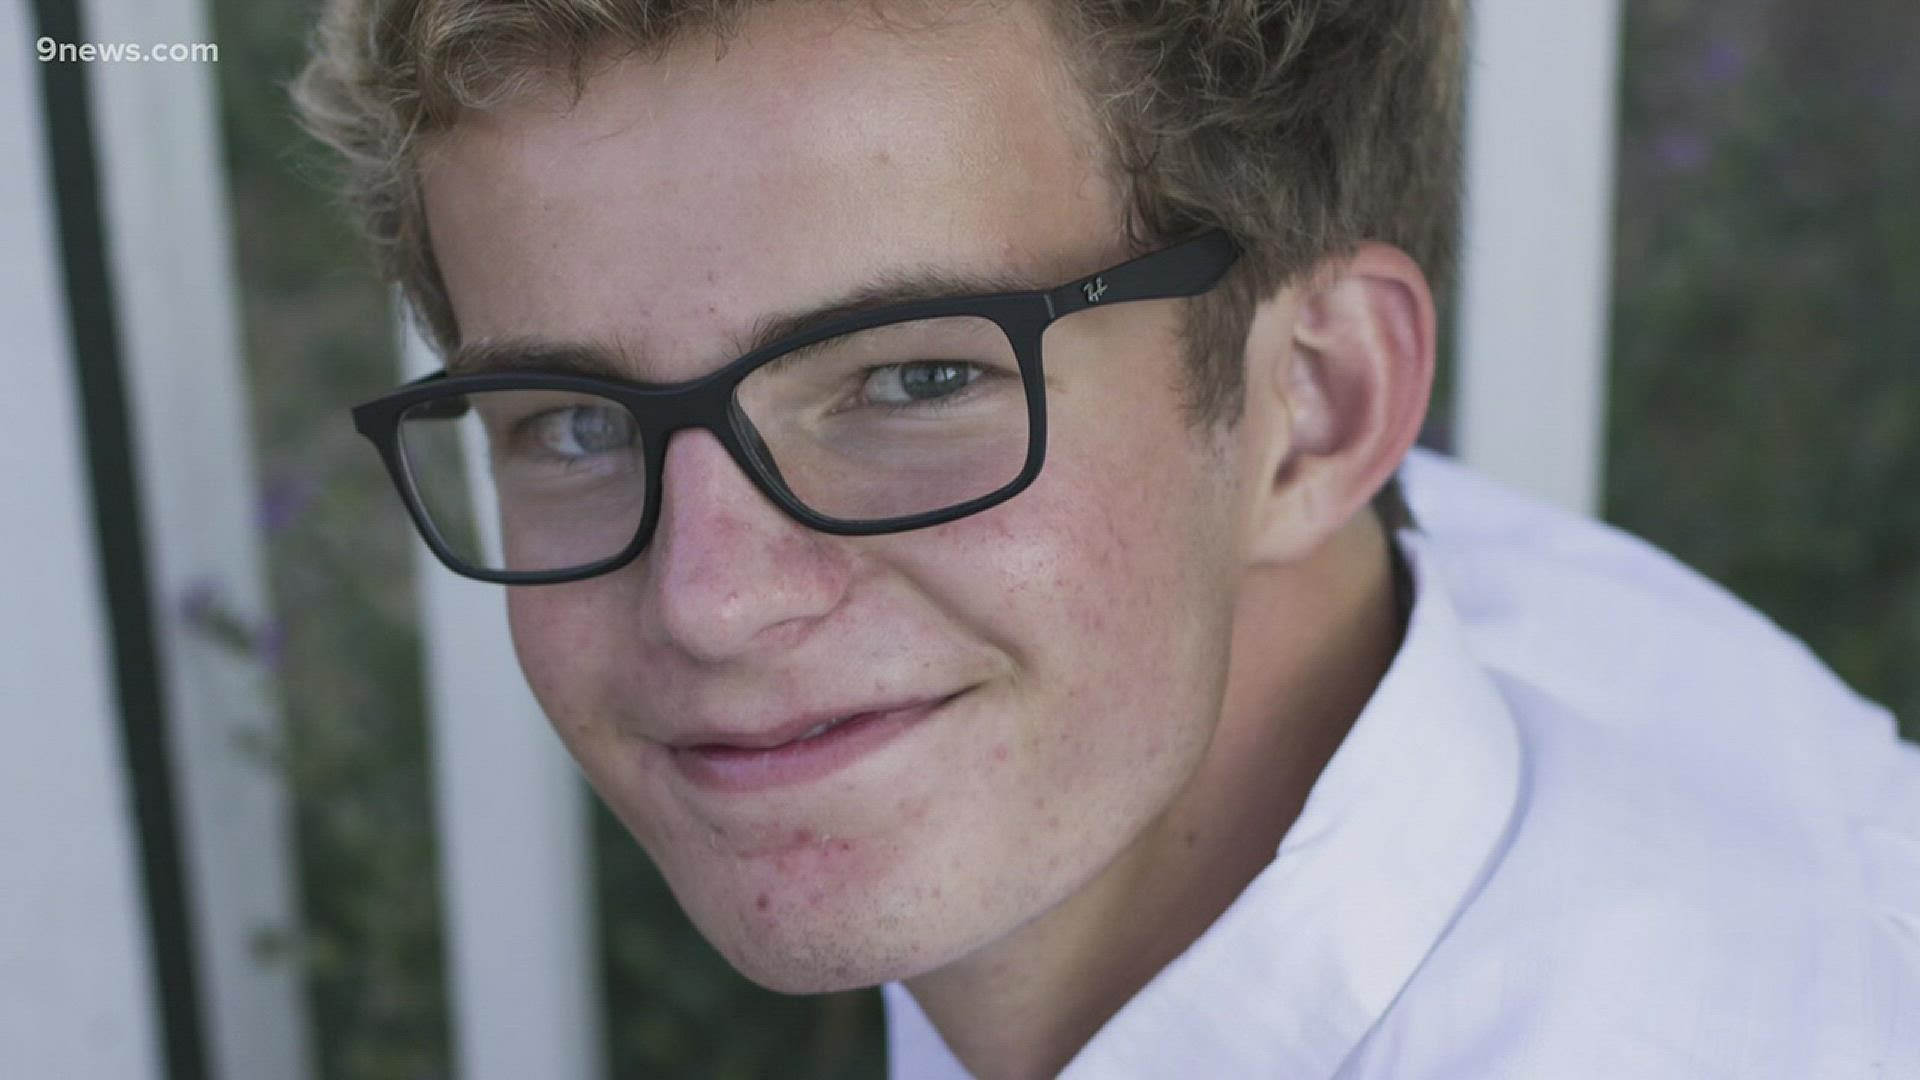 Robbie Eckert, 15, ended his life Oct. 11. Now, his parents are raising money with the goal of starting a nonprofit to provide support to local mental health resources.